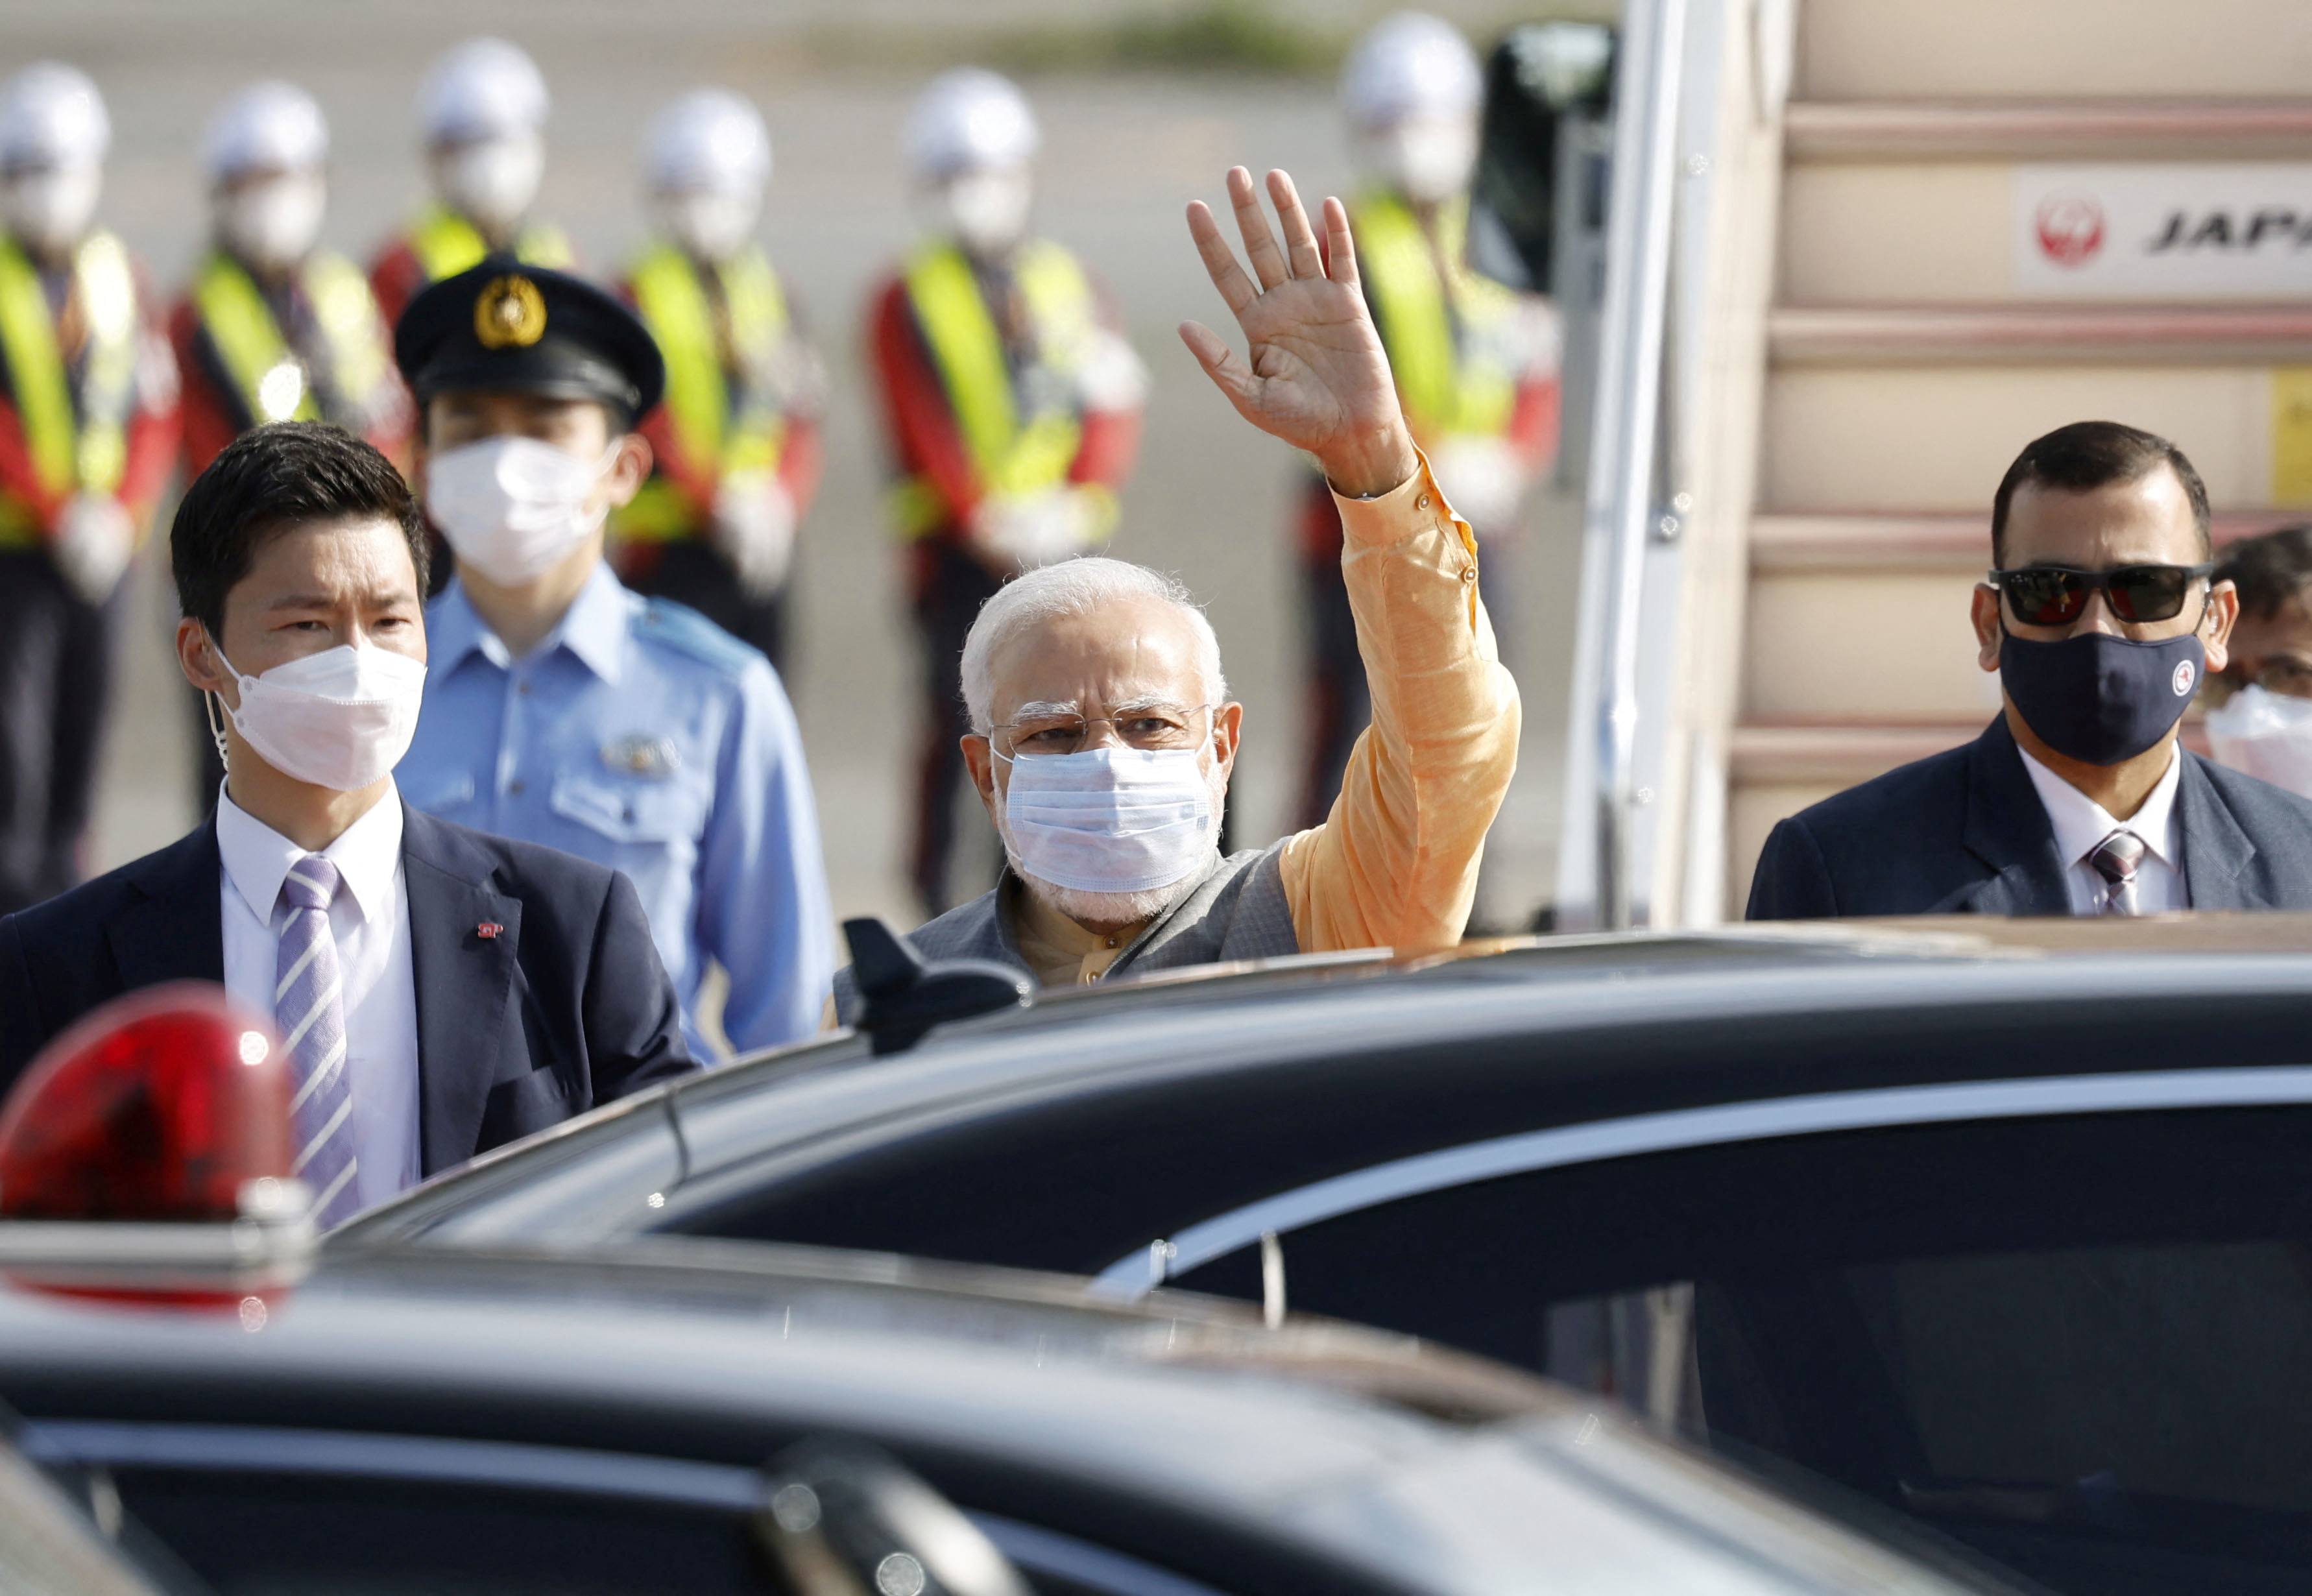 Indian PM Modi waves ahead of Quad Leaders' Summit in Tokyo